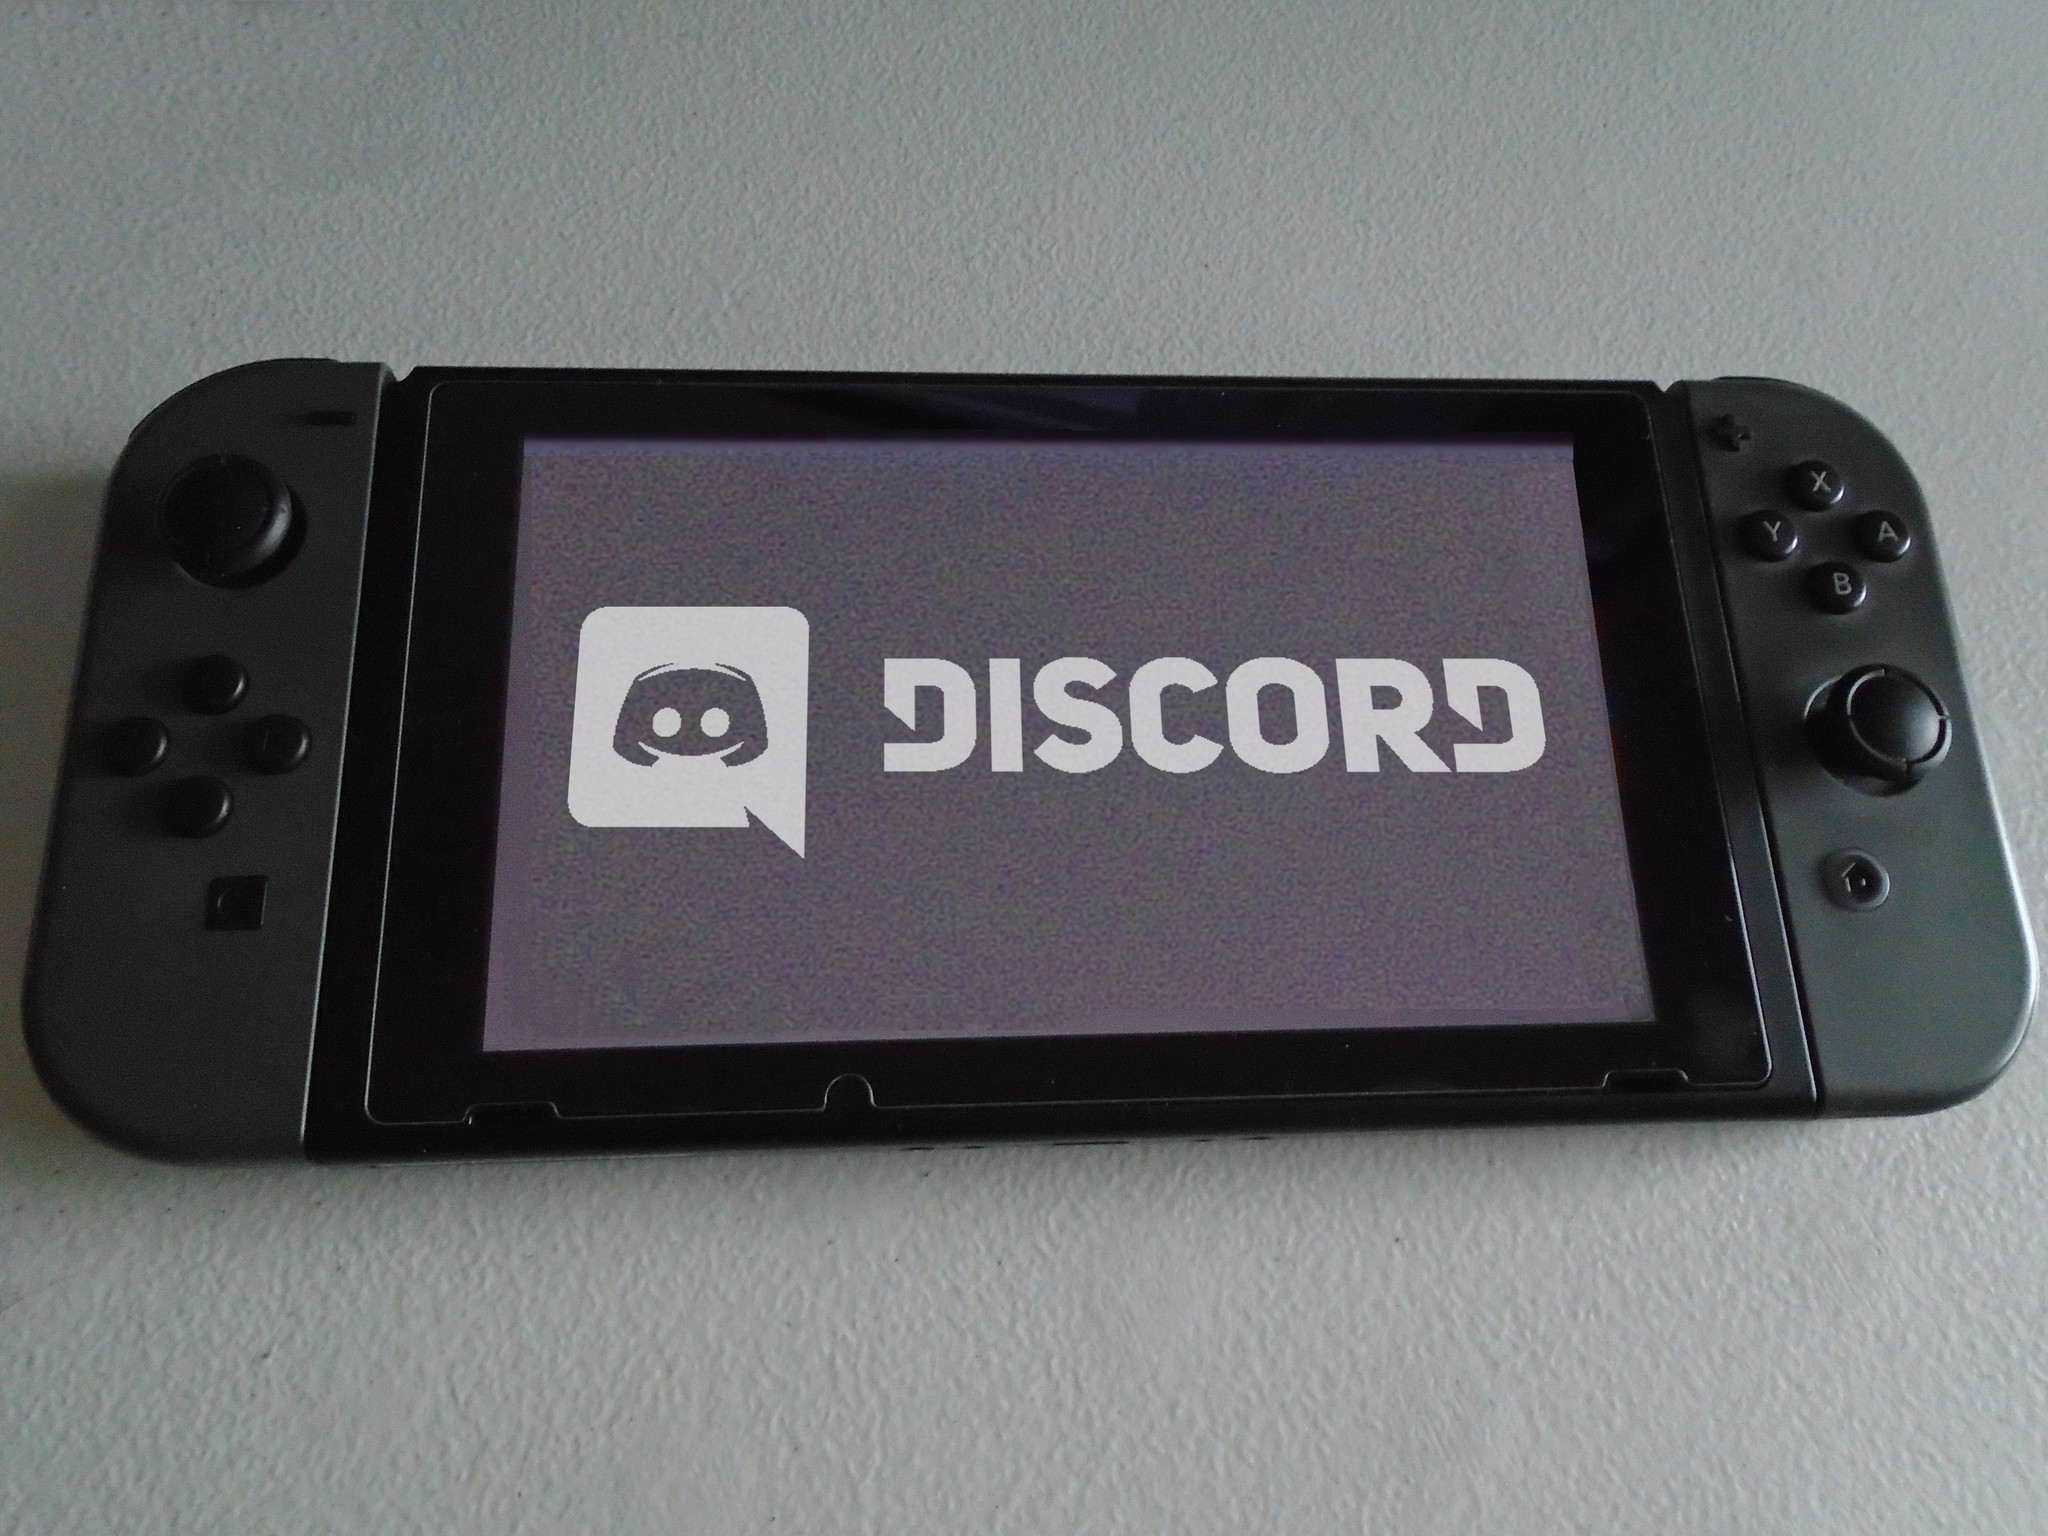 Discord For Nintendo Switch Everything We Know So Far Imore